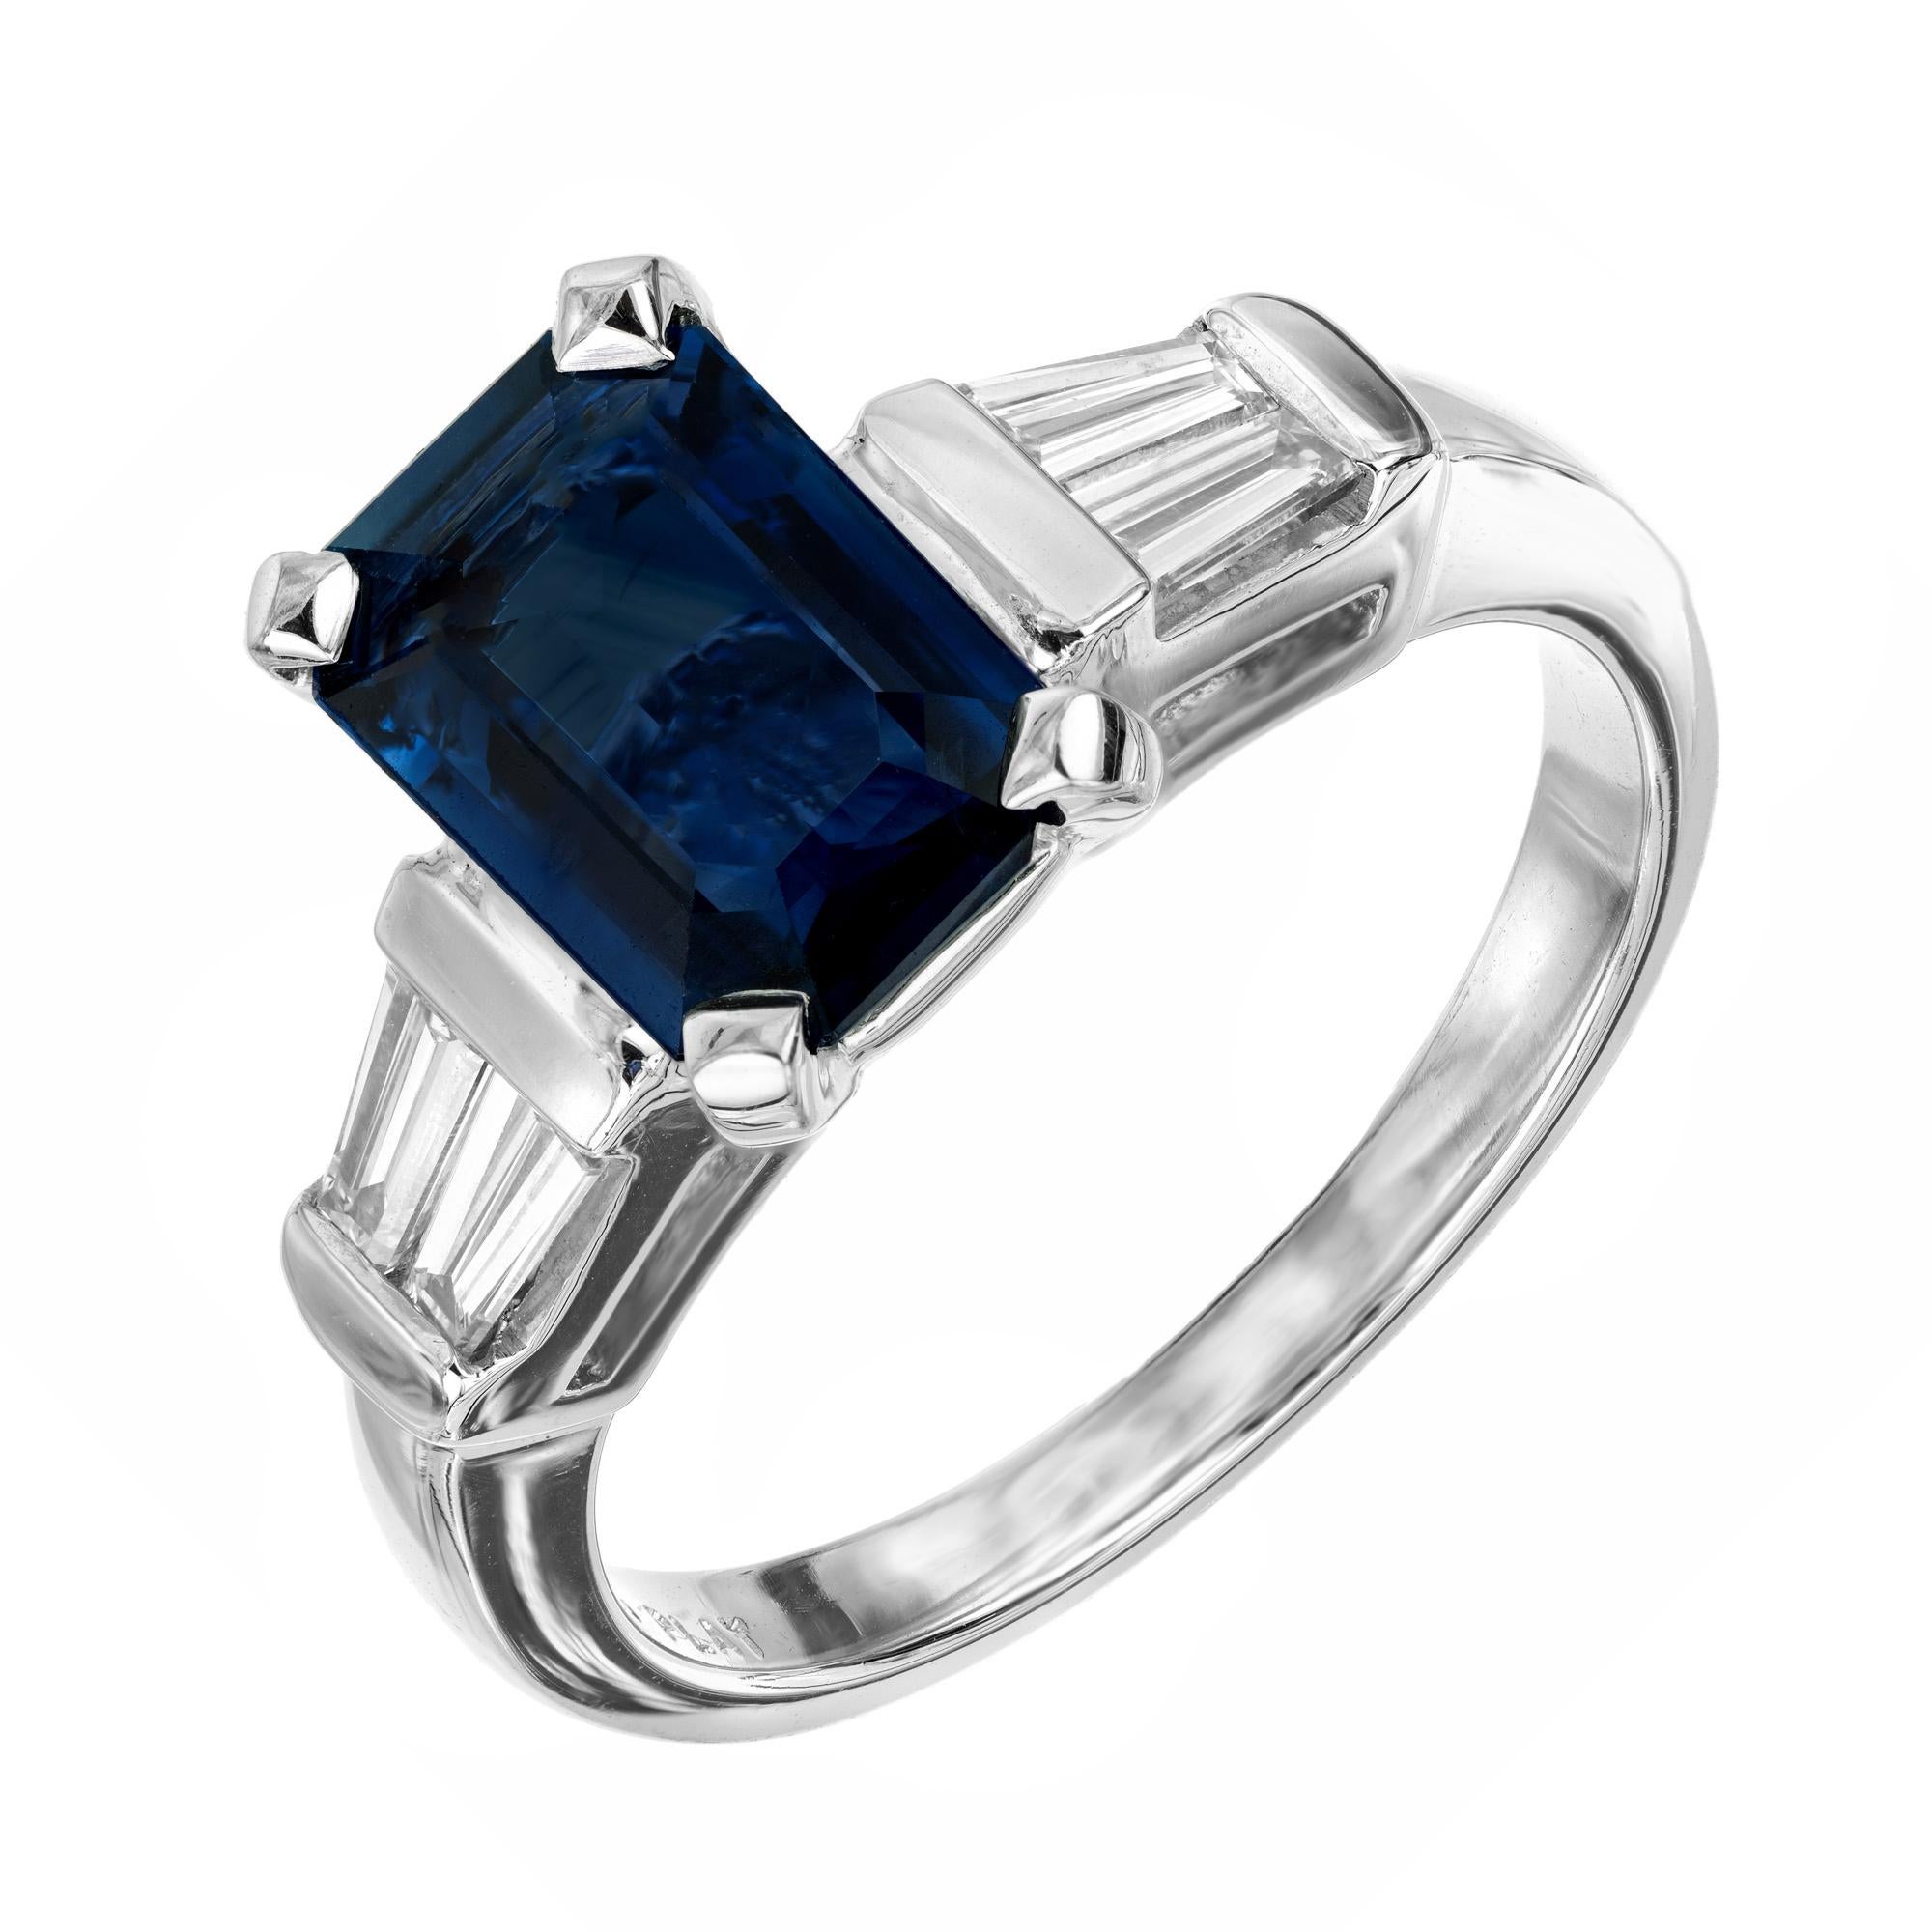 Art Deco Inspired sapphire and diamond engagement ring. The center of this mounting is set with a 2.09 octagonal step cut blue sapphire which is accented by two tapered baguette diamonds on each side of the stone. The sapphire is GIA certified as